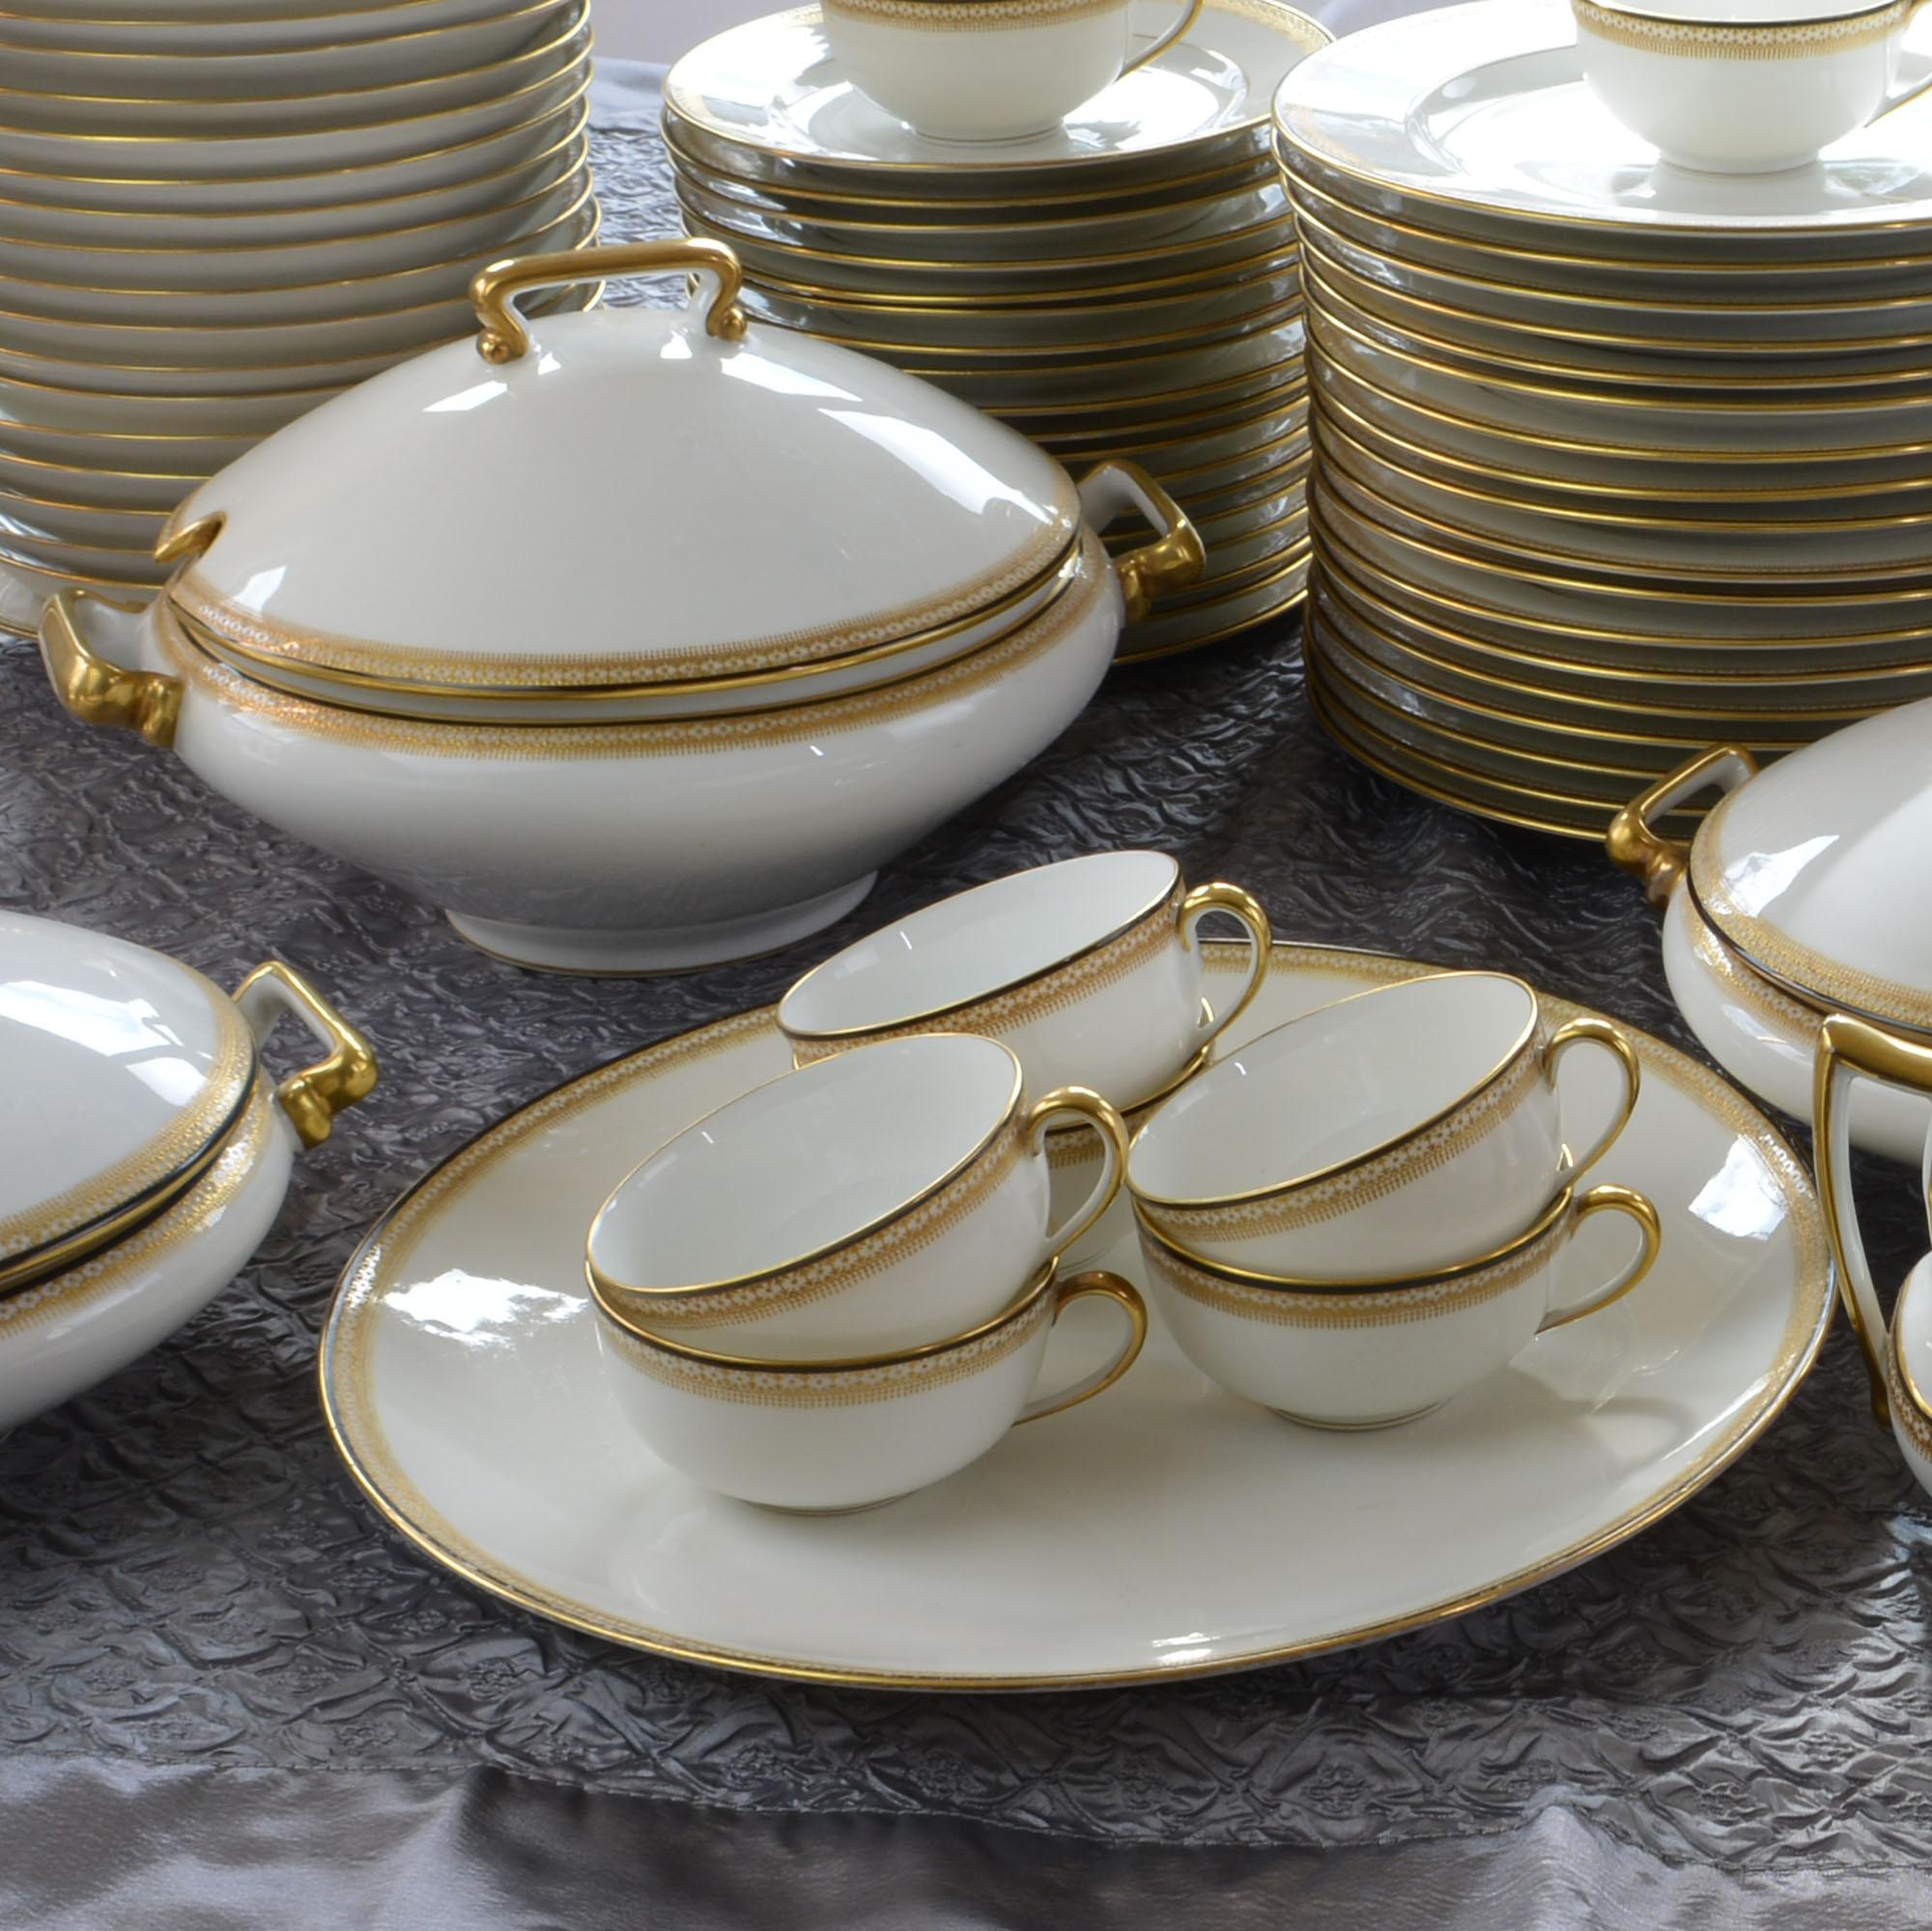 137 Piece Set China by Tressemann and Vogt of Limoges Service for 18 11